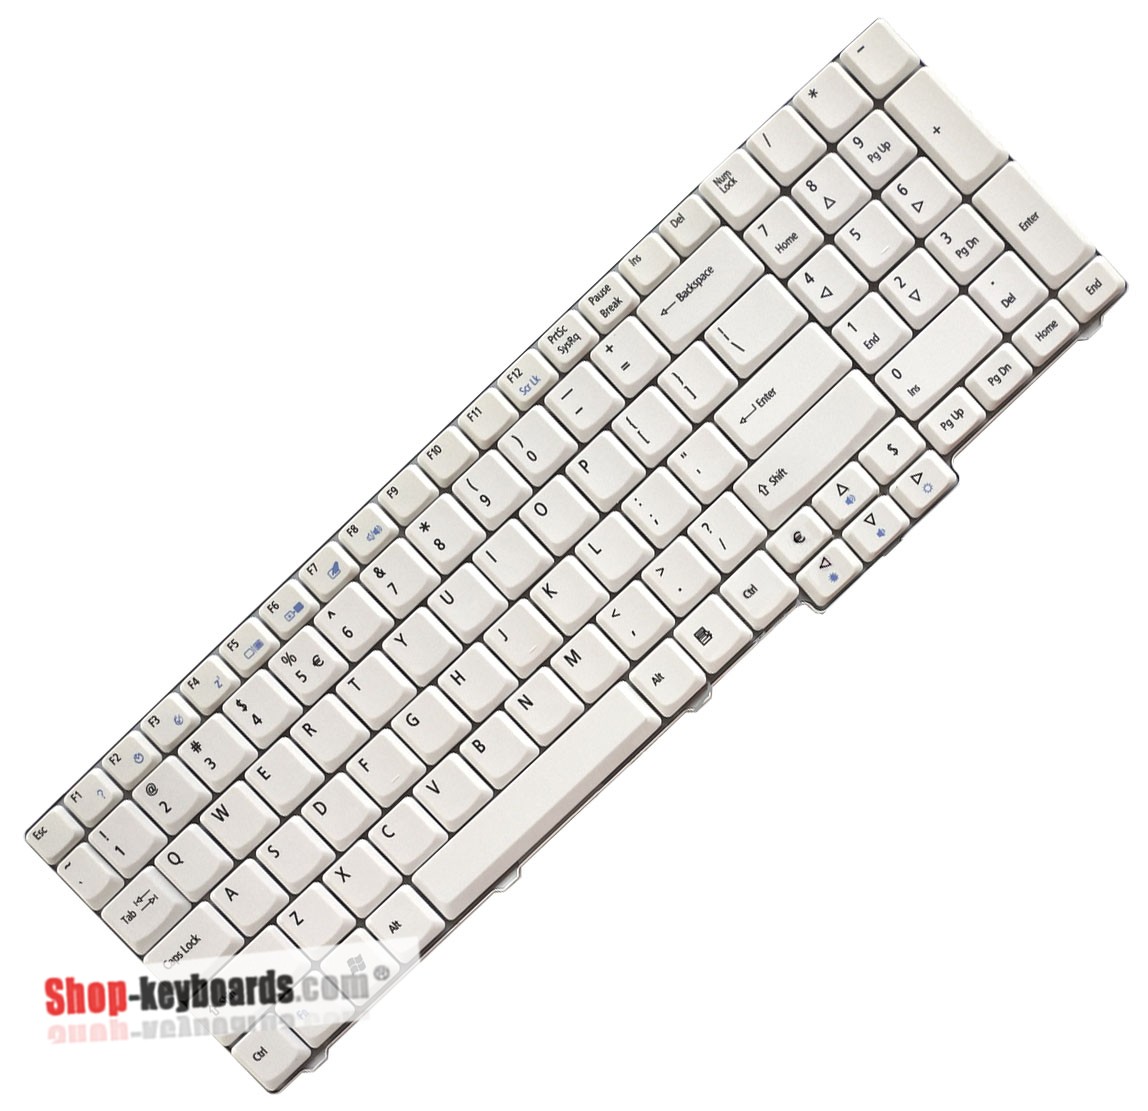 Acer Aspire 7520-5626 Keyboard replacement